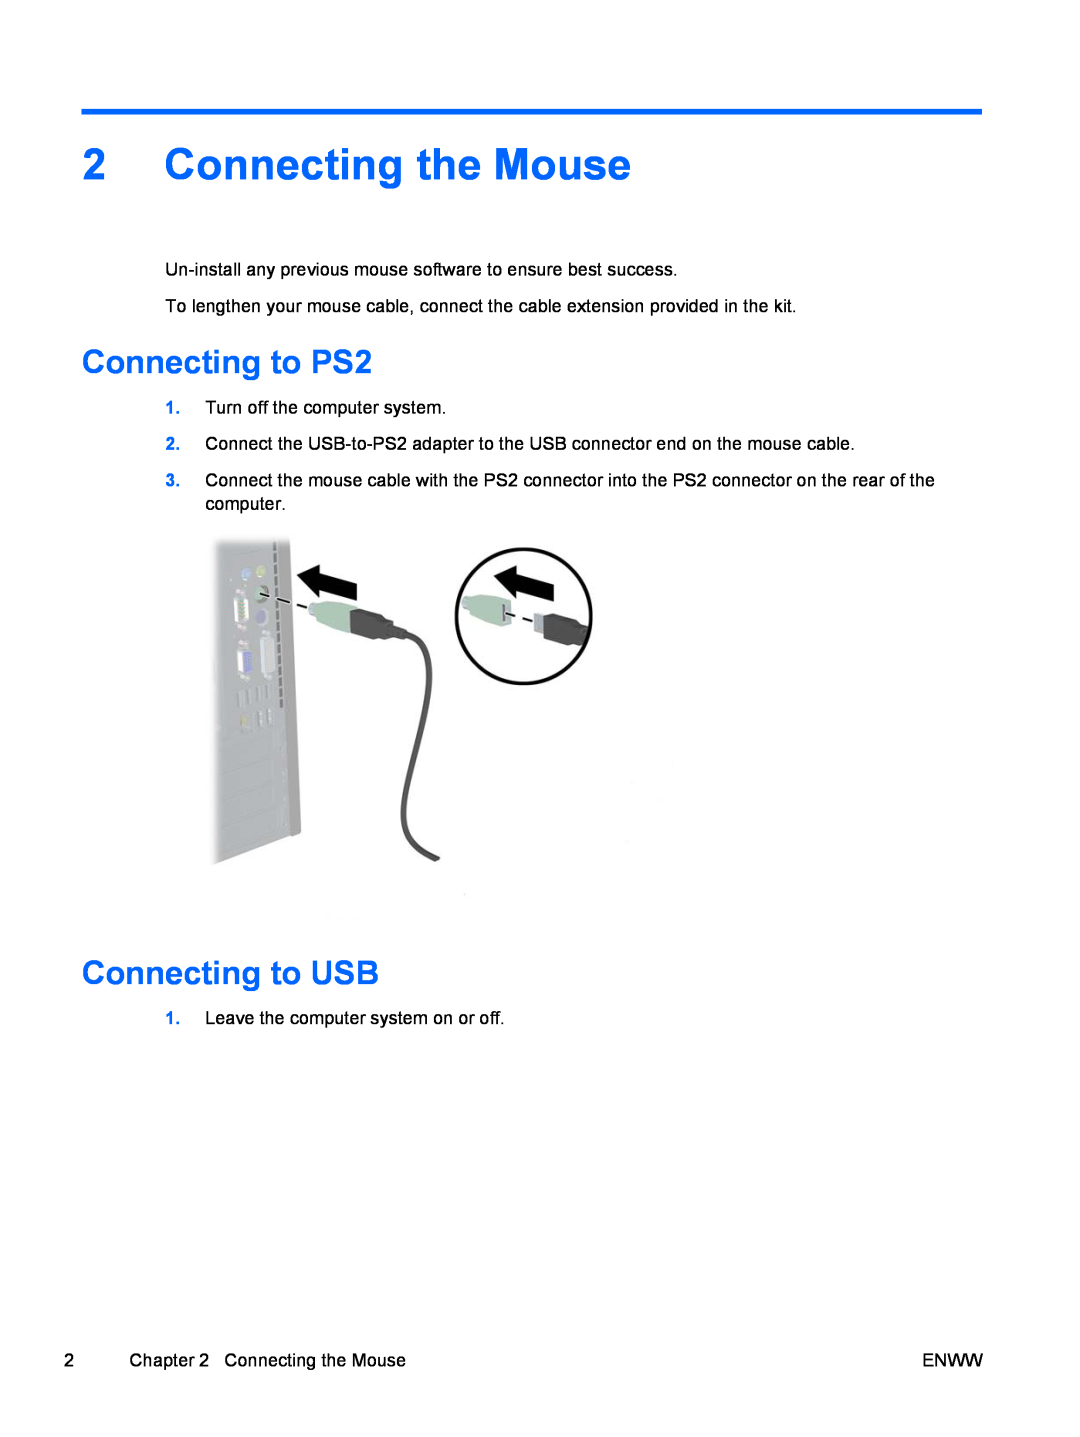 HP 8000 tower manual Connecting the Mouse, Connecting to PS2, Connecting to USB 